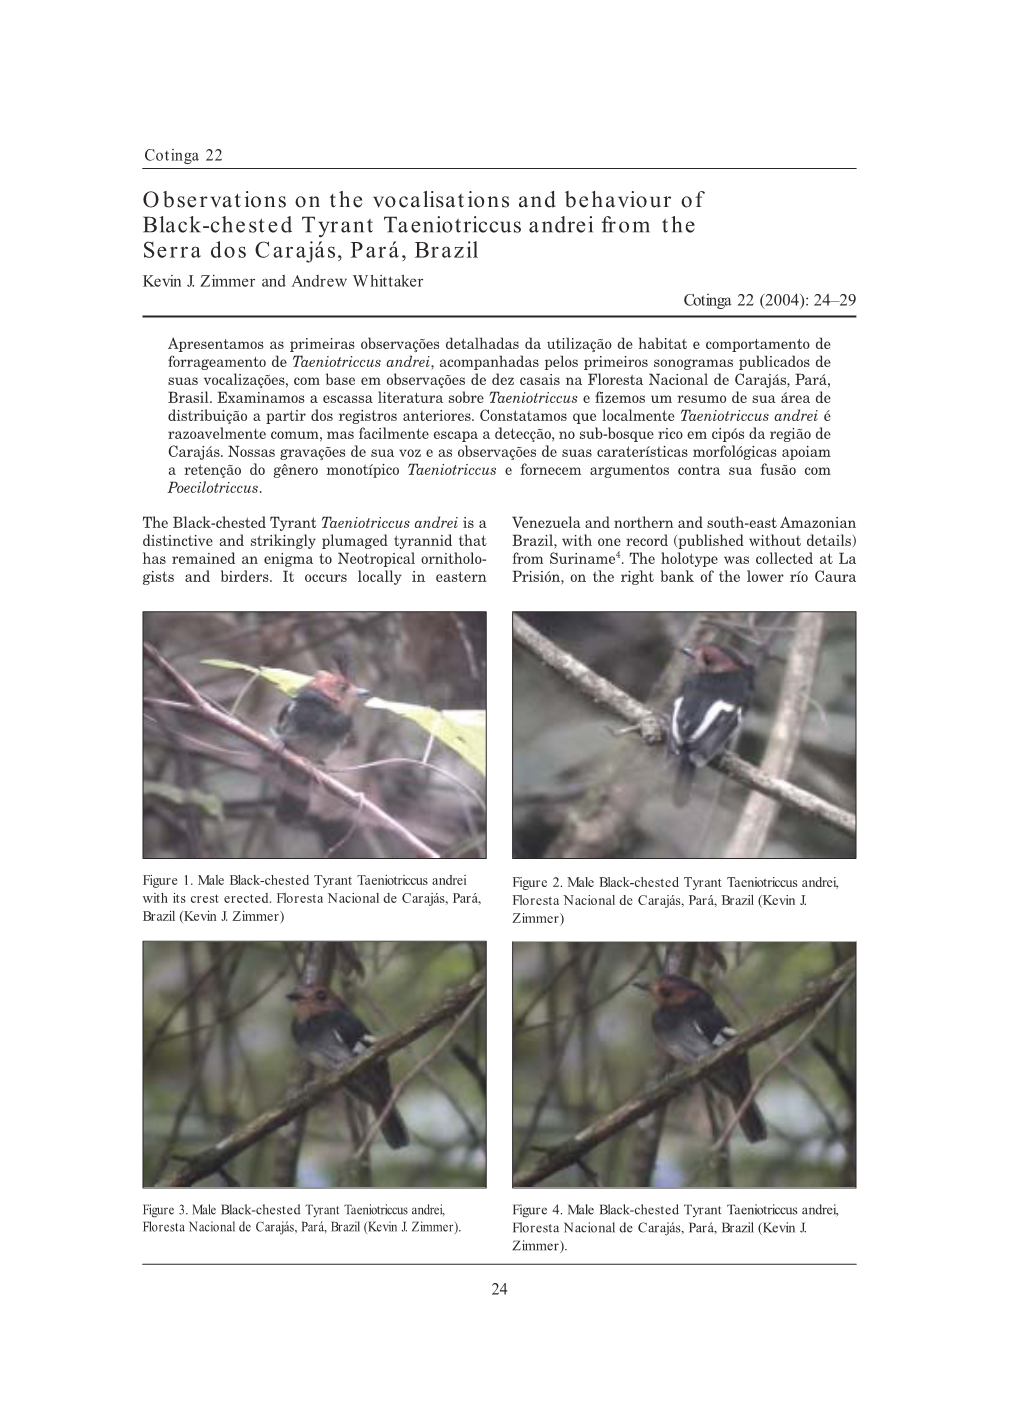 Observations on the Vocalisations and Behaviour of Black-Chested Tyrant Taeniotriccus Andrei from the Serra Dos Carajás, Pará, Brazil Kevin J